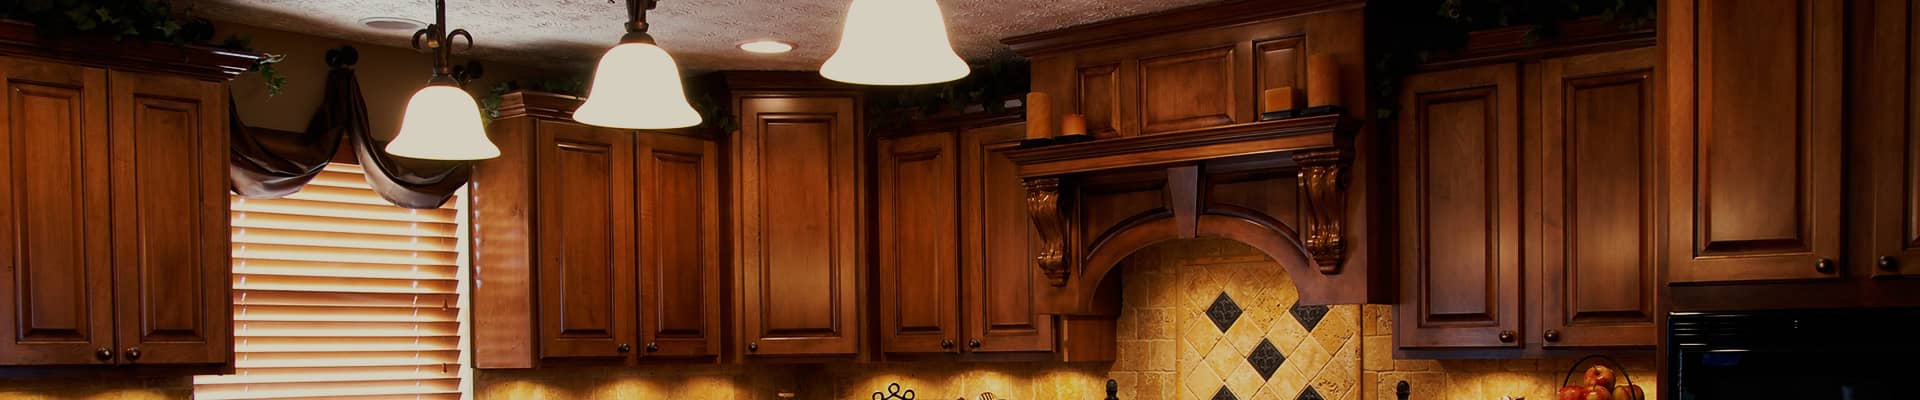 Brown Cabinets And Lighting — Medford, OR — Gary Smith Custom Cabinet Shop